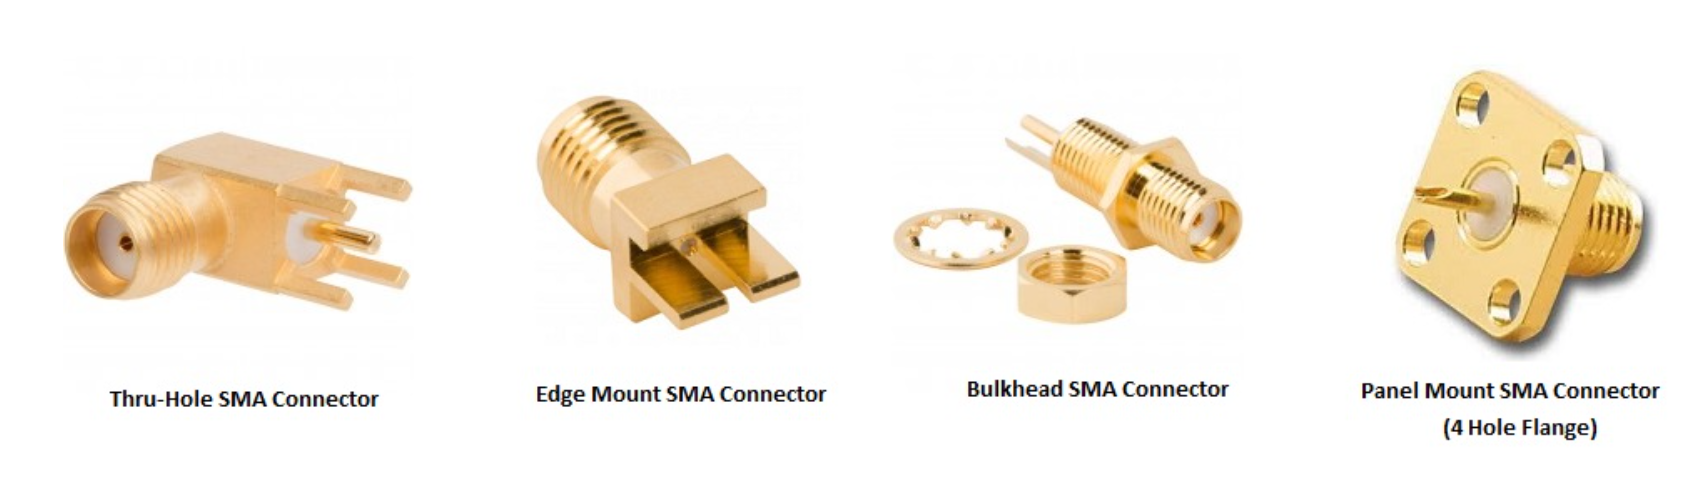 SMA Connector Mounting Options